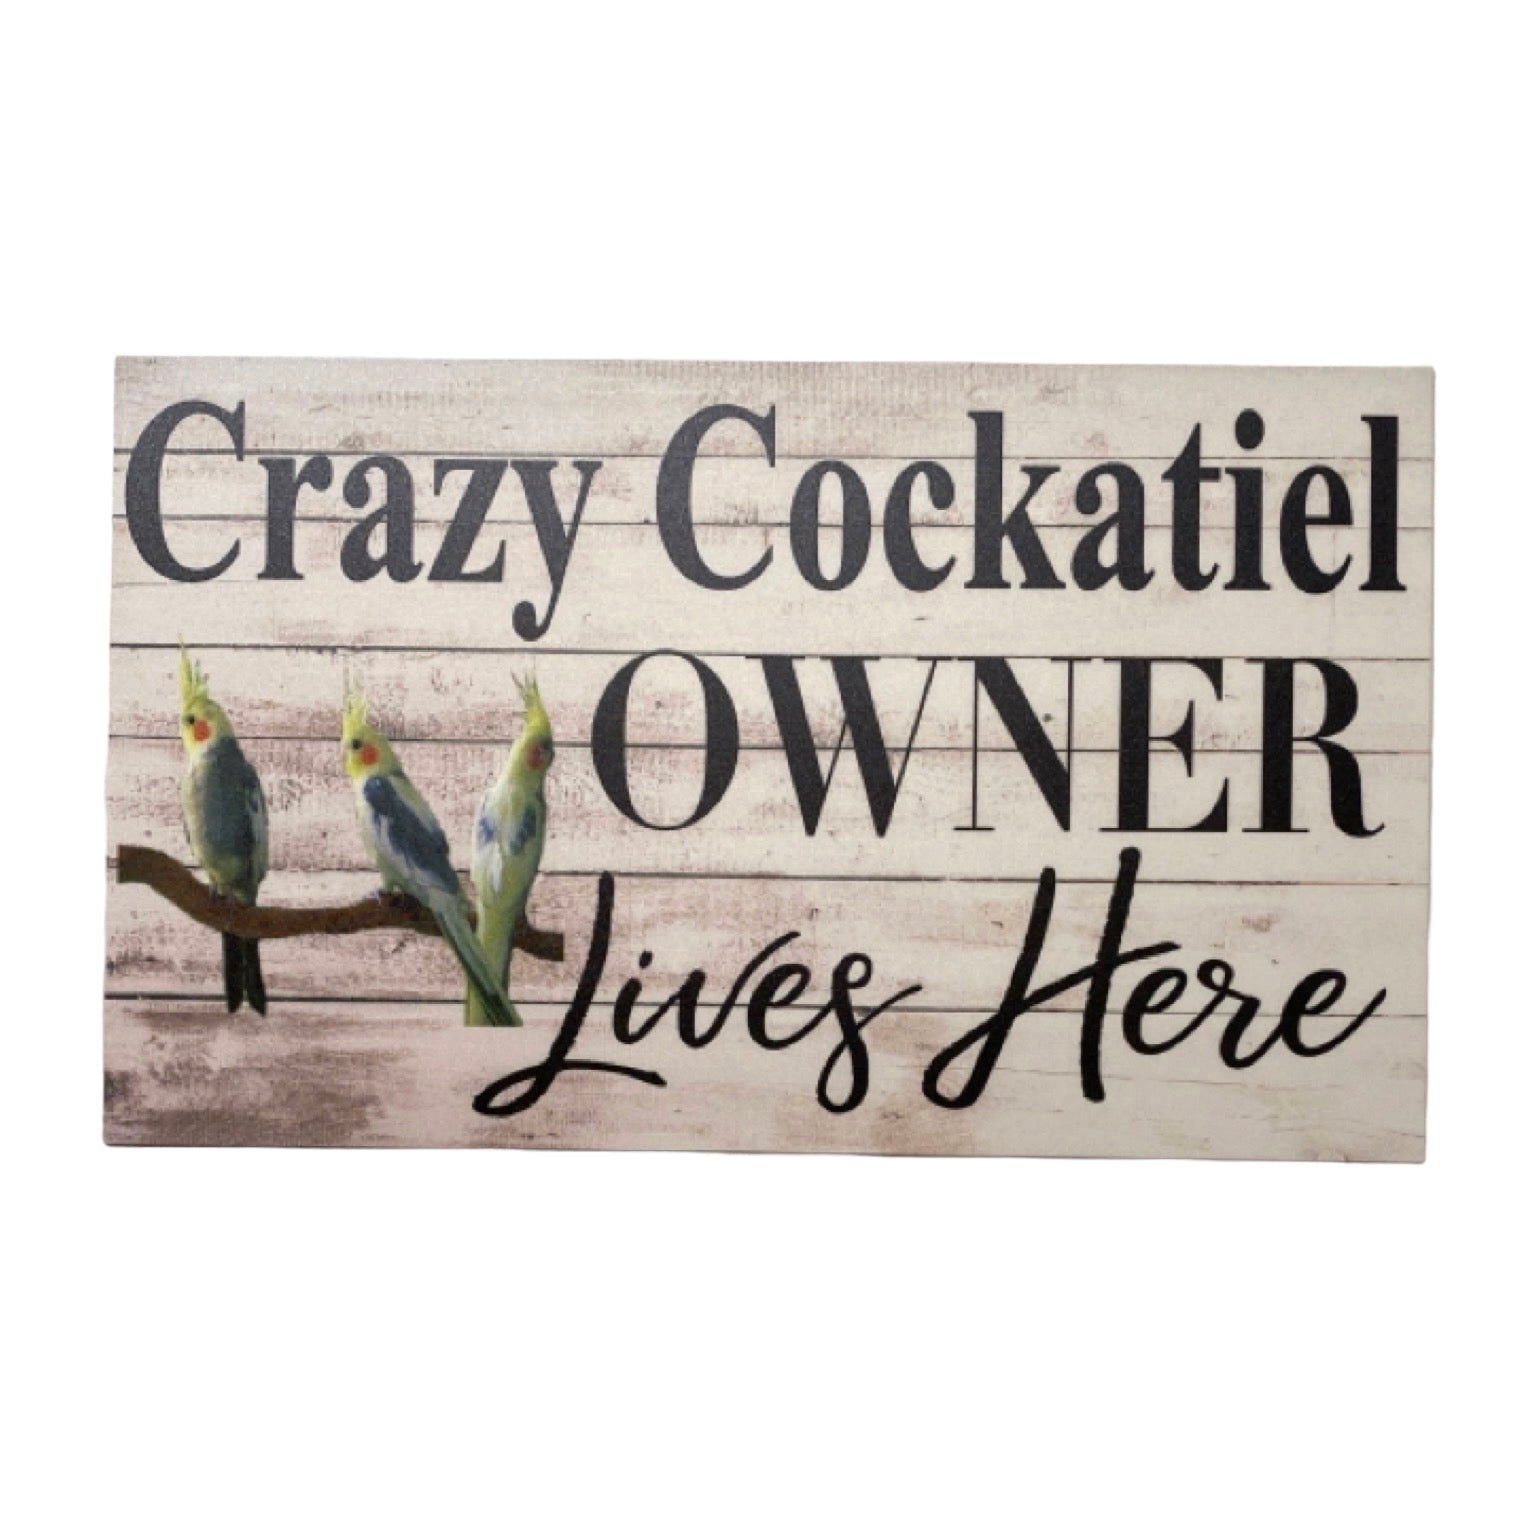 Crazy Cockatiel Owner Lives Here Parrot Sign - The Renmy Store Homewares & Gifts 